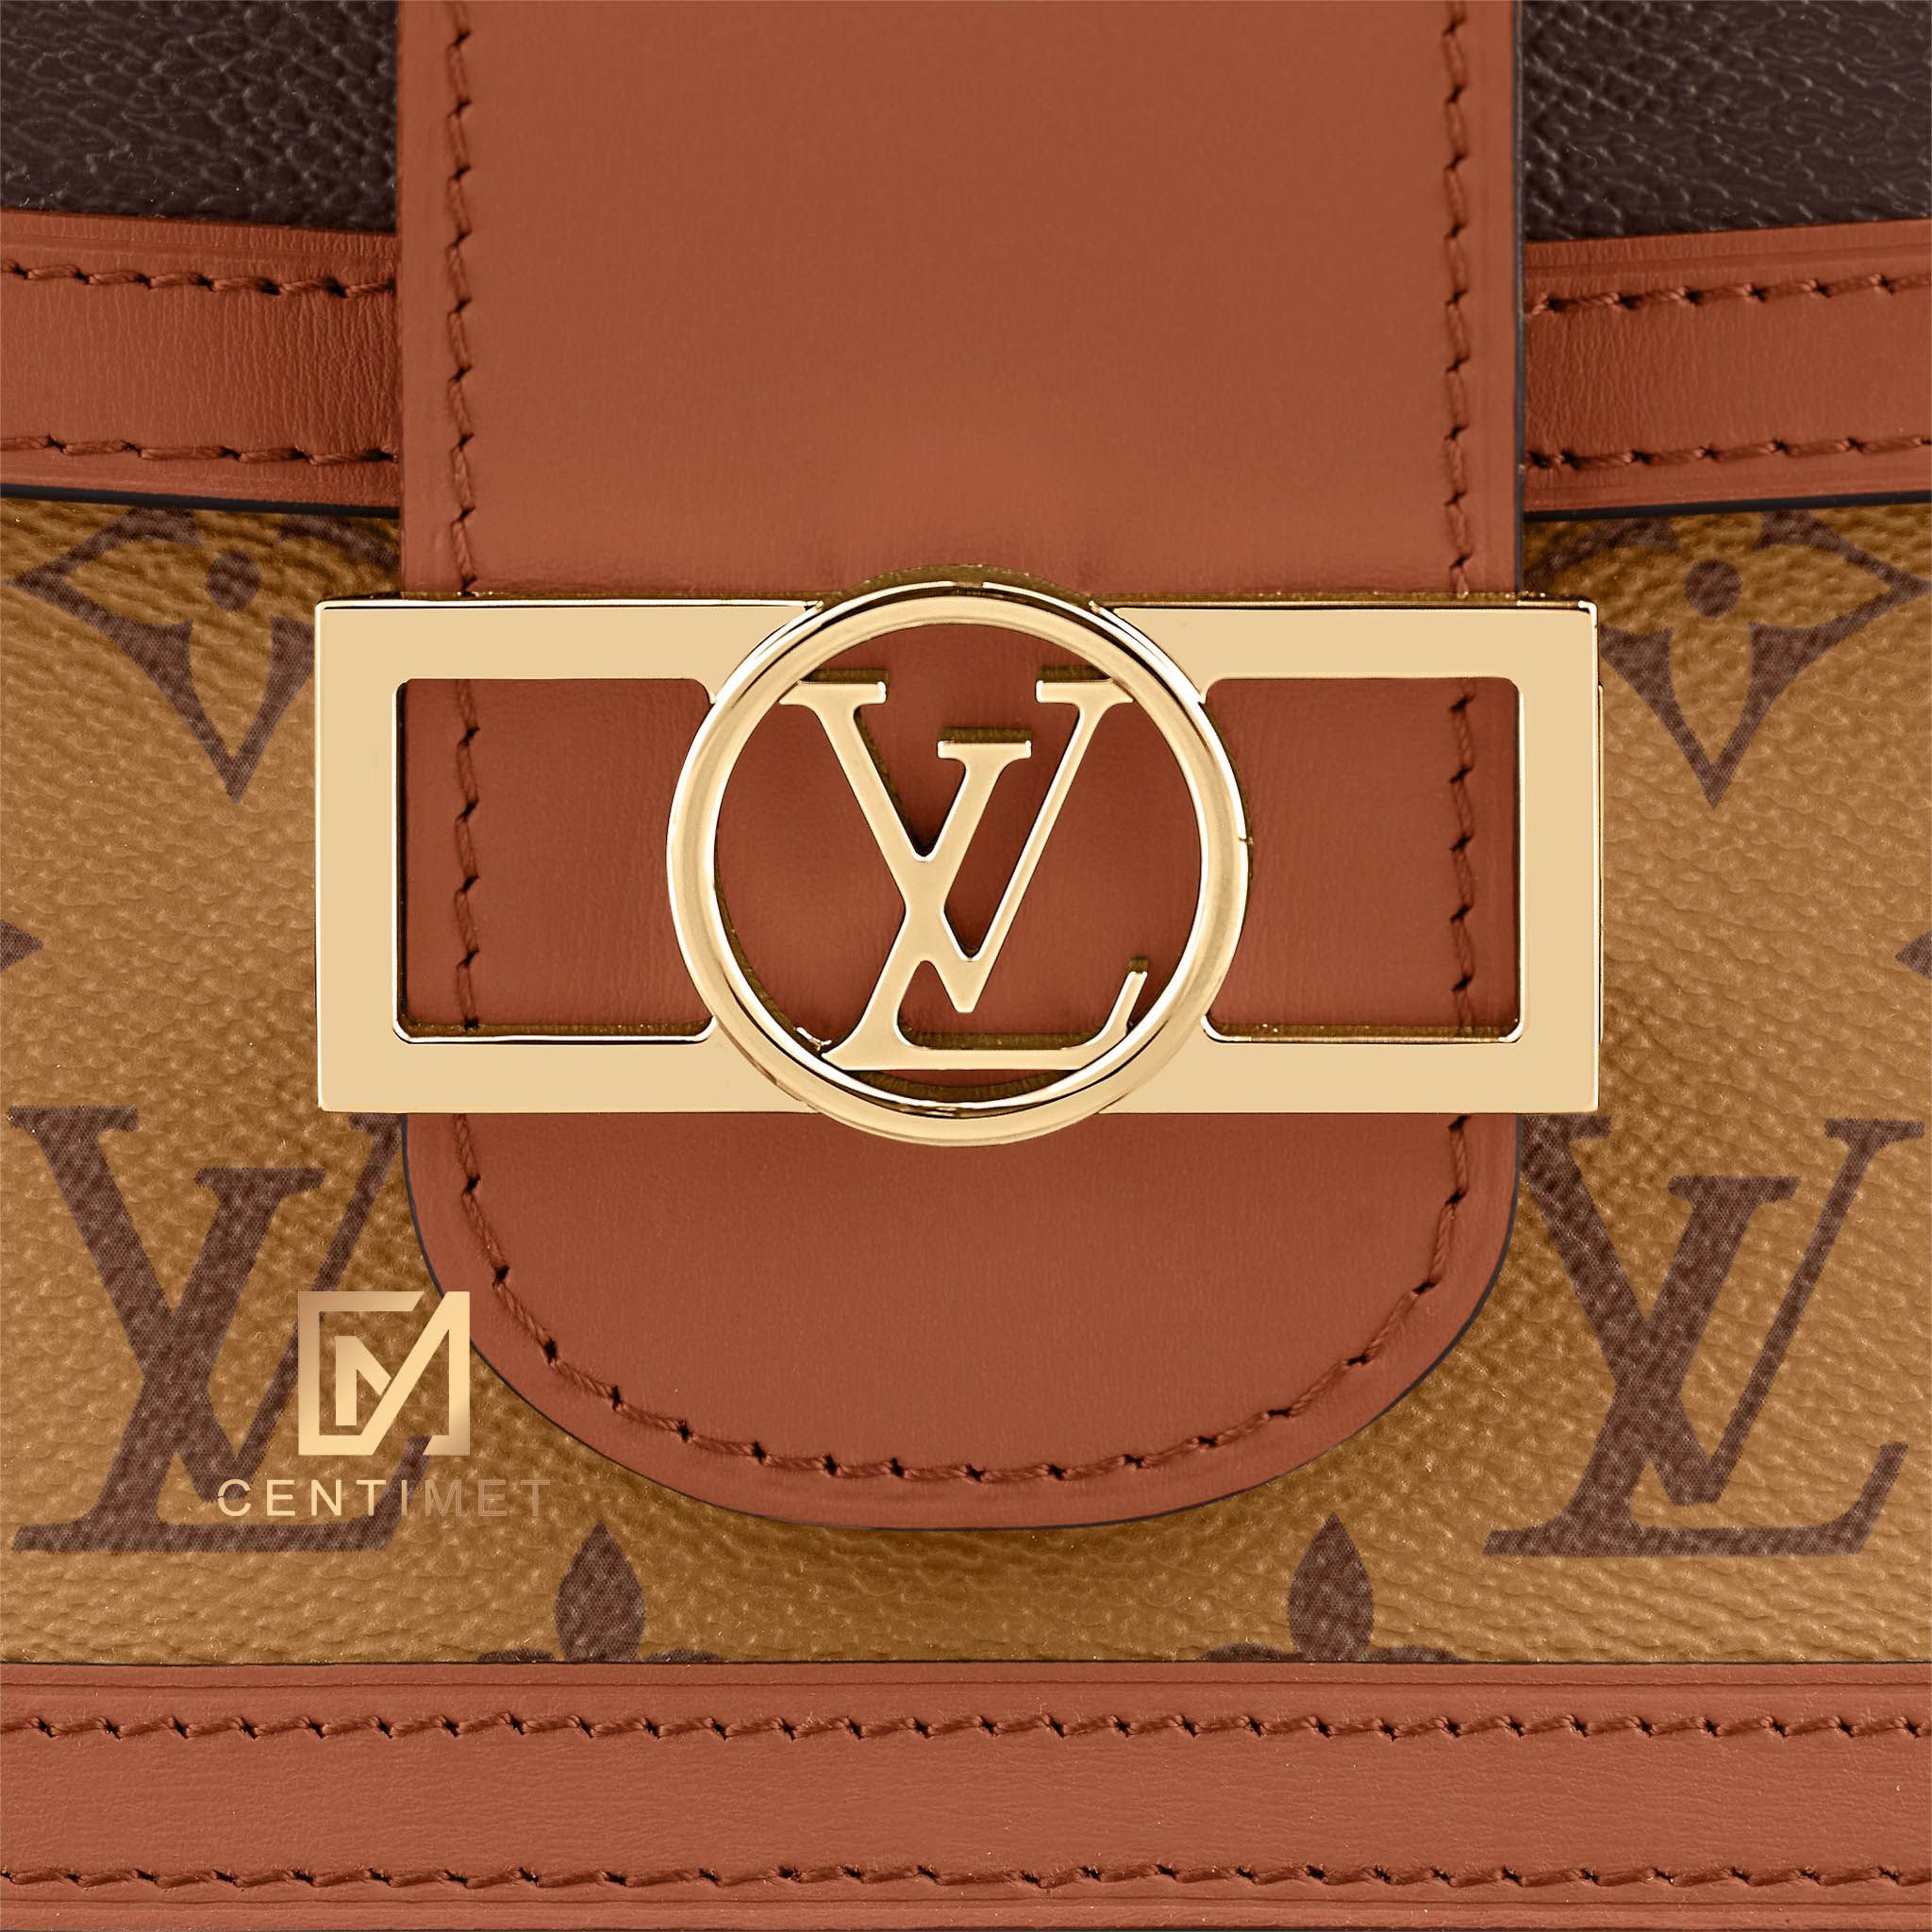 How to Spot Fake Louis Vuitton Bags 9 Ways to Tell Real Purses